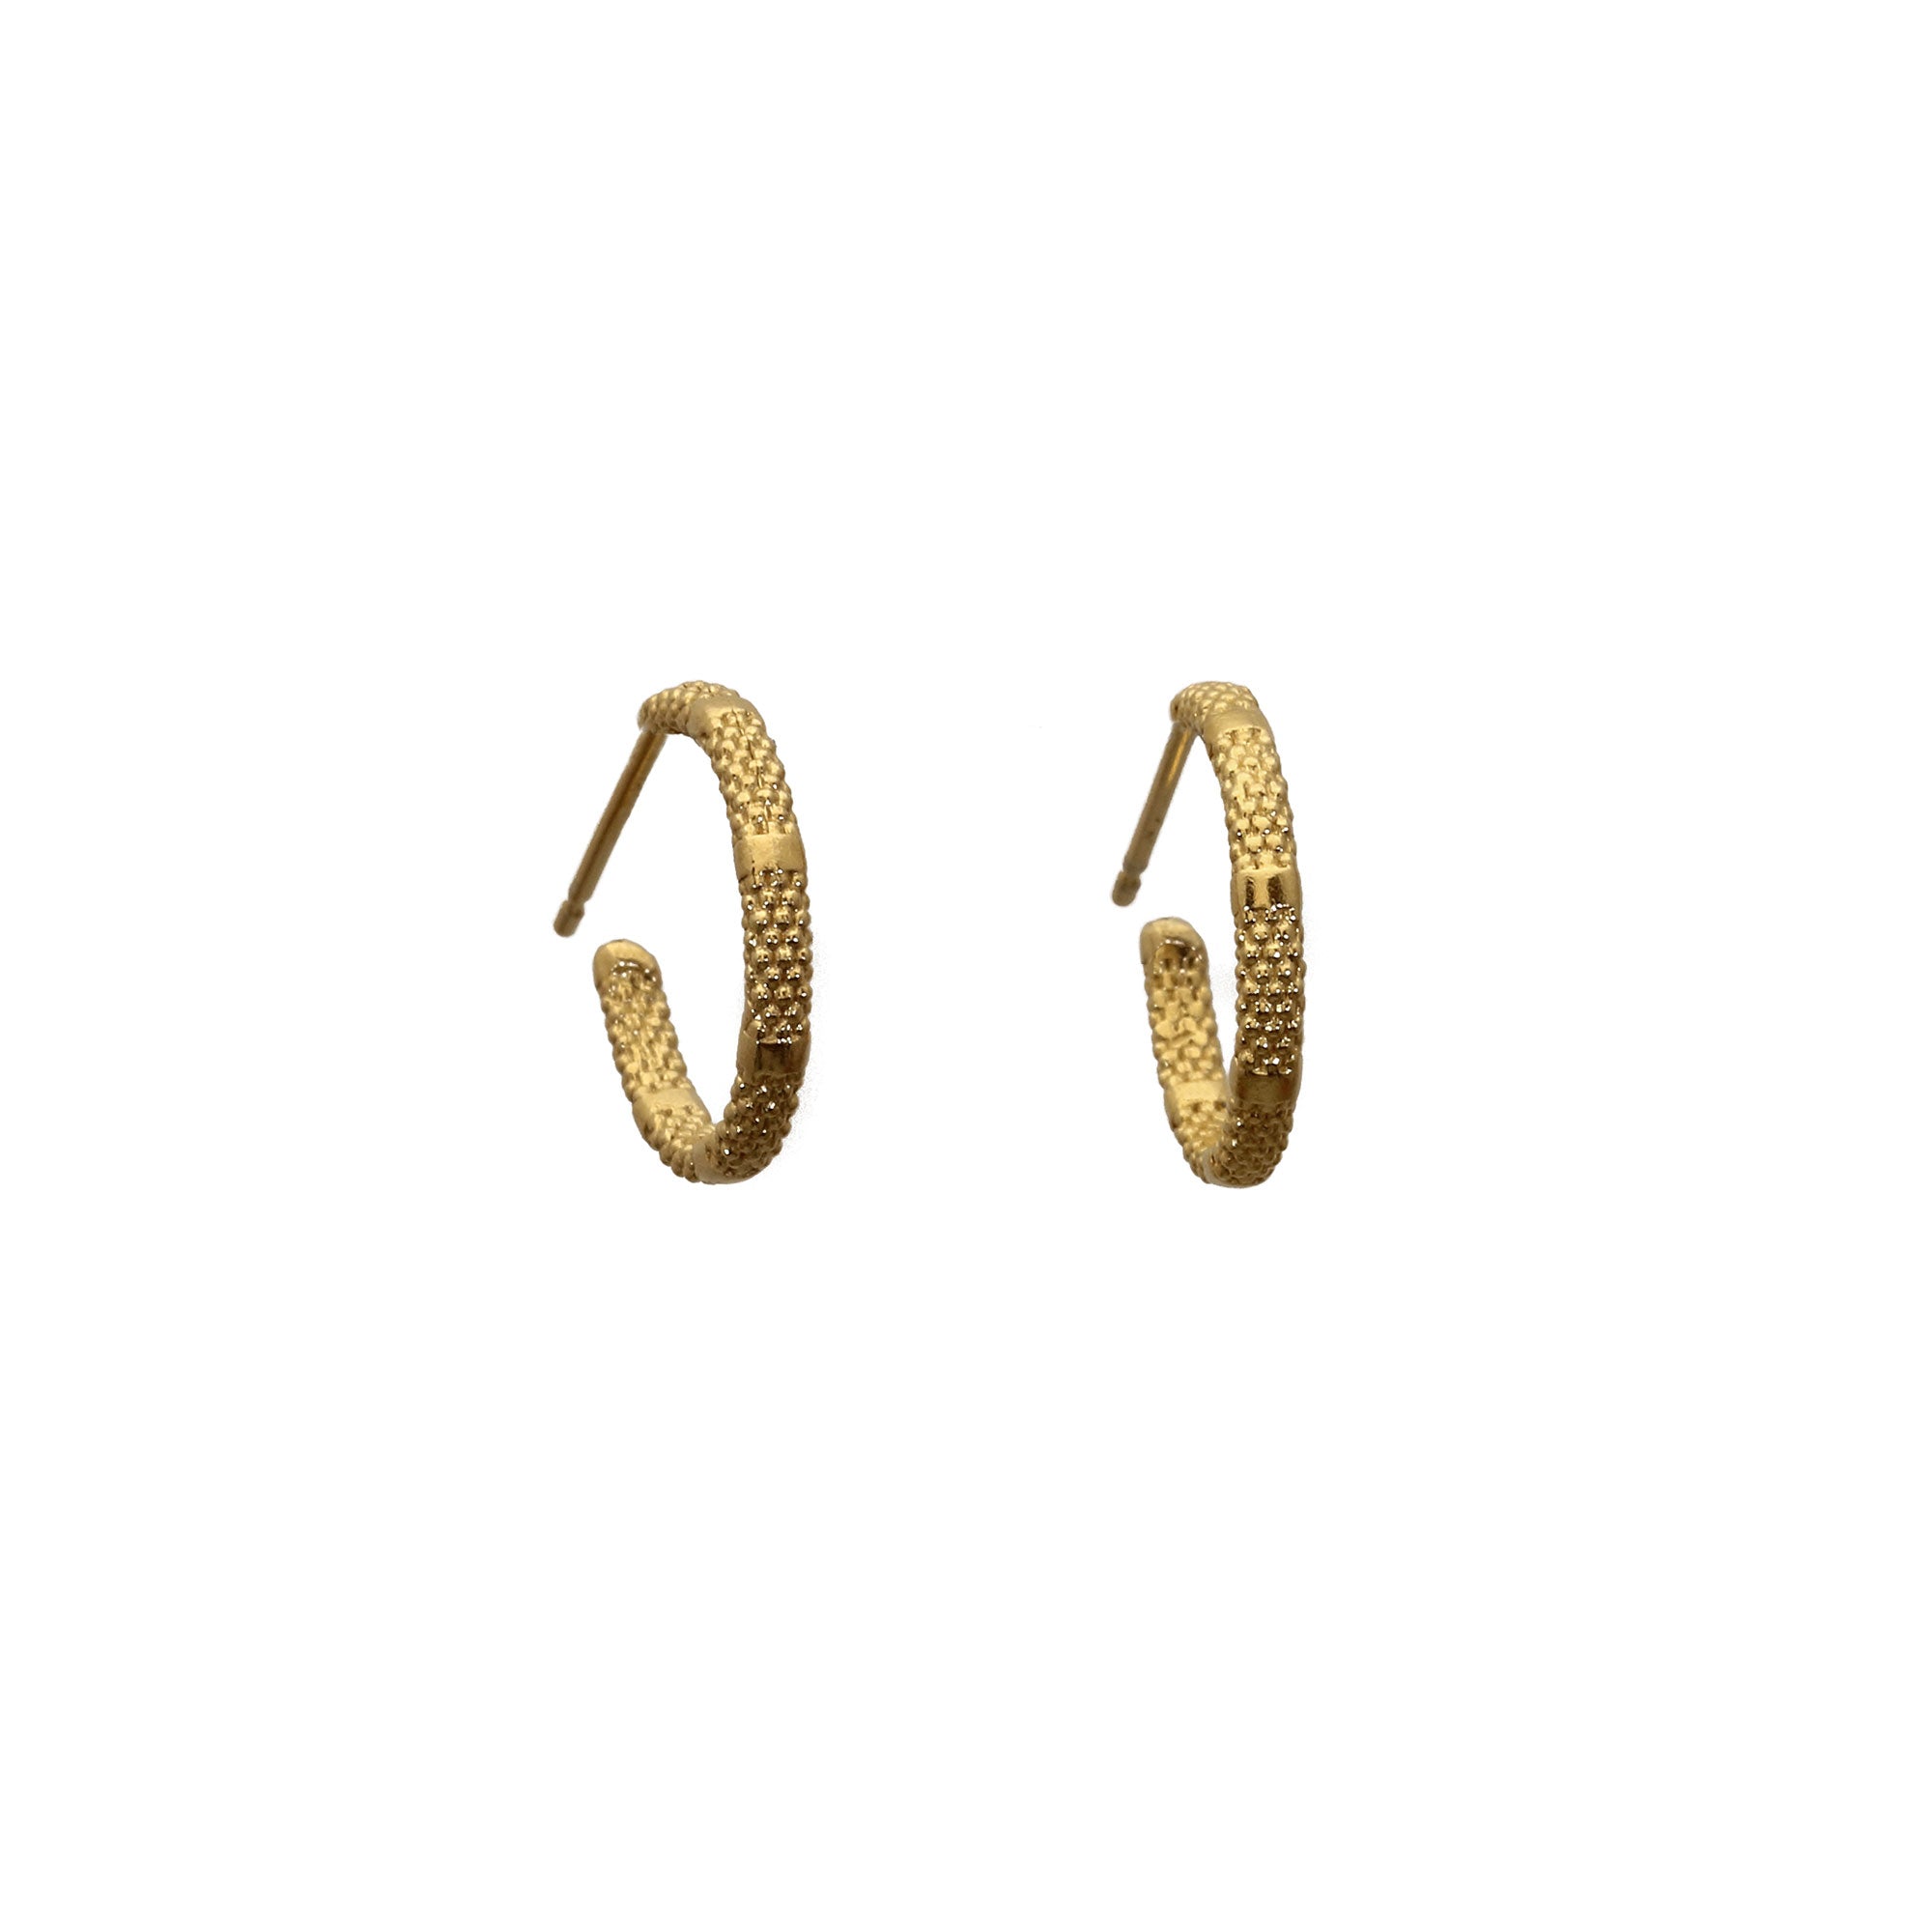 Yellow gold small hoop earrings with alternating rough and smooth texture